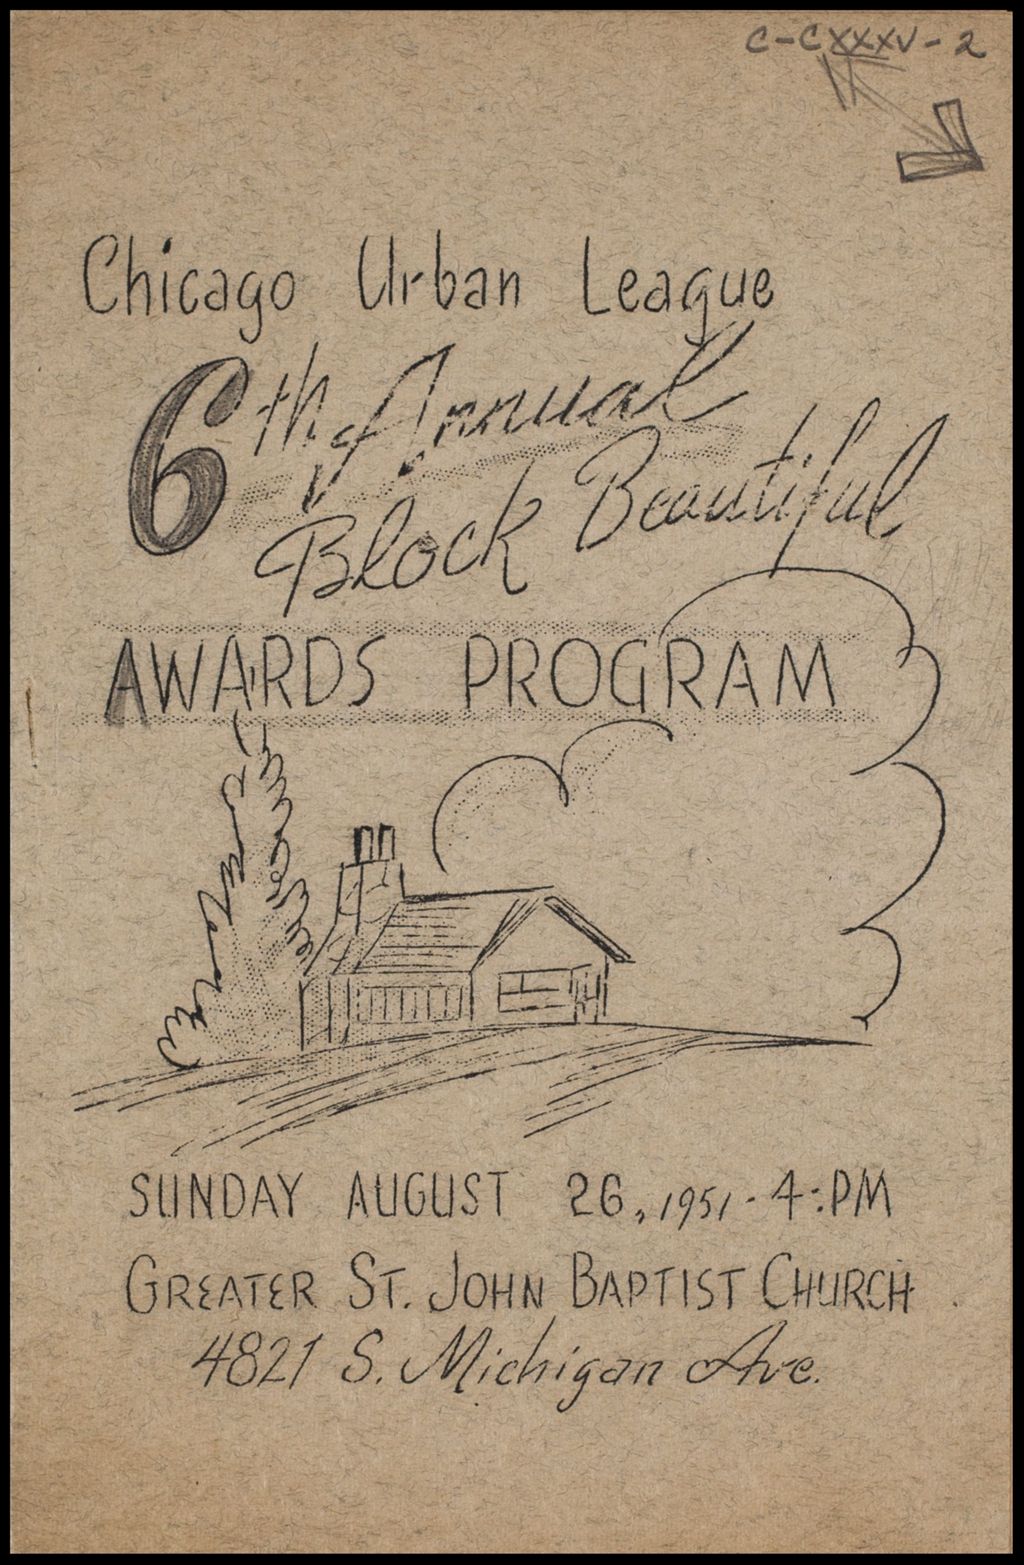 Block Clubs - Announcements of Special Events, 1951-1955 (Folder II-2310)